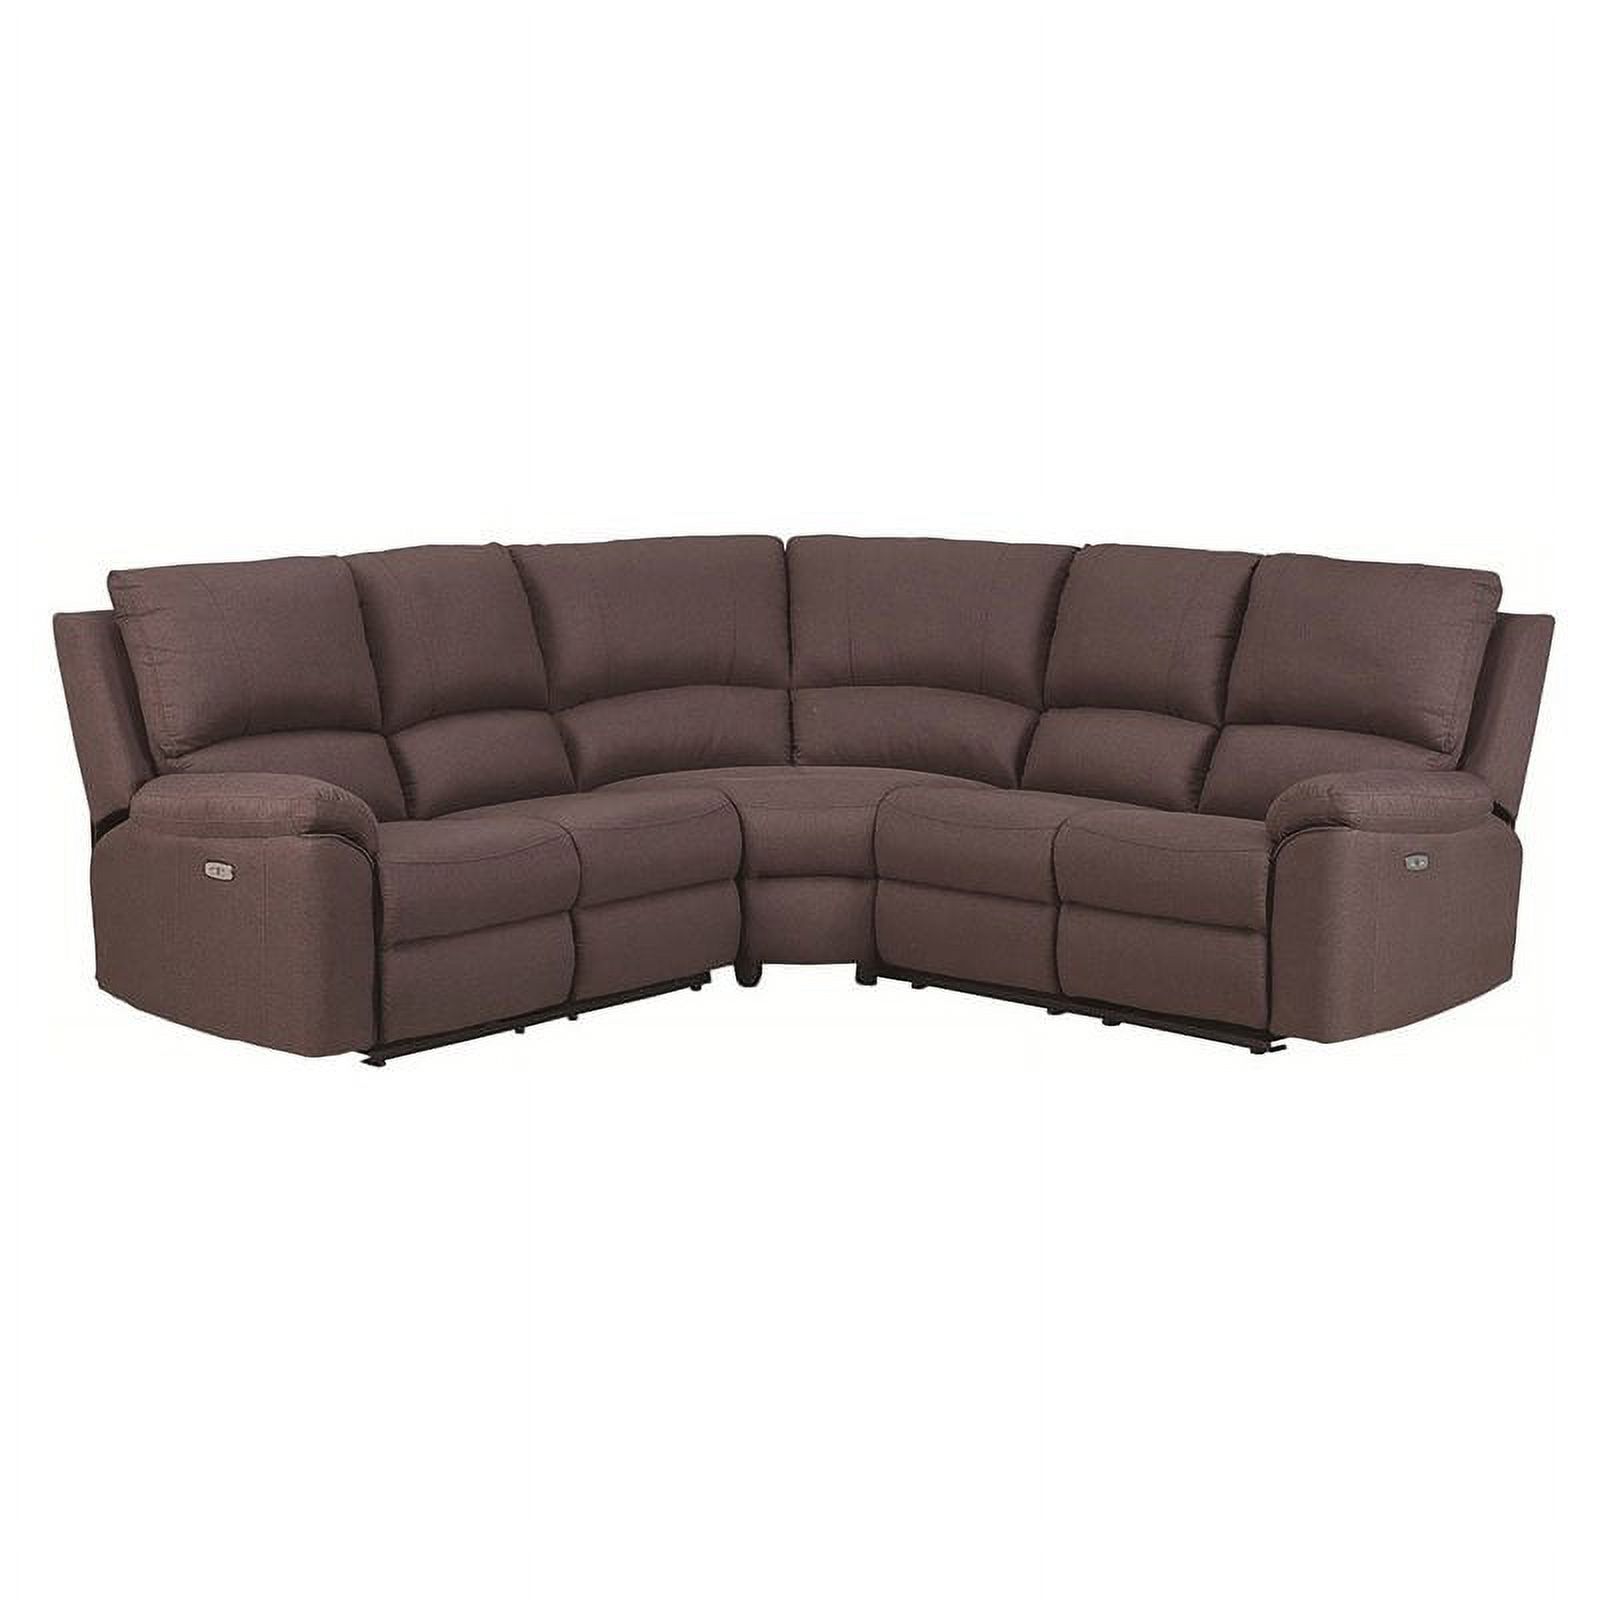 Titan Furnishings Transitional Chanille Fabric Power Reclining Sectional - Brown - image 1 of 28